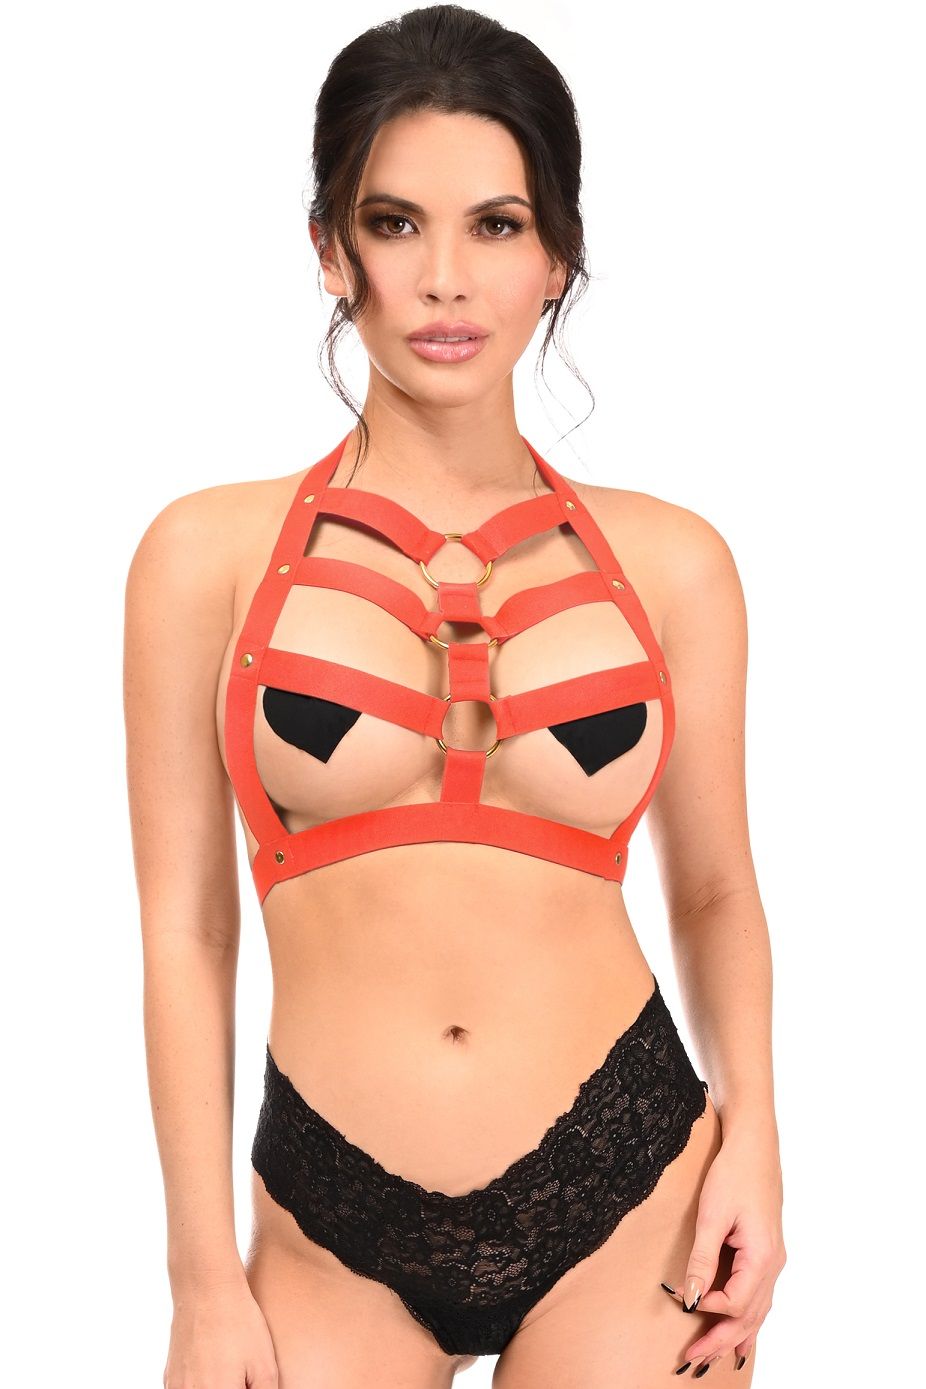 Stretchy Body Harness w Metal Ring Detail